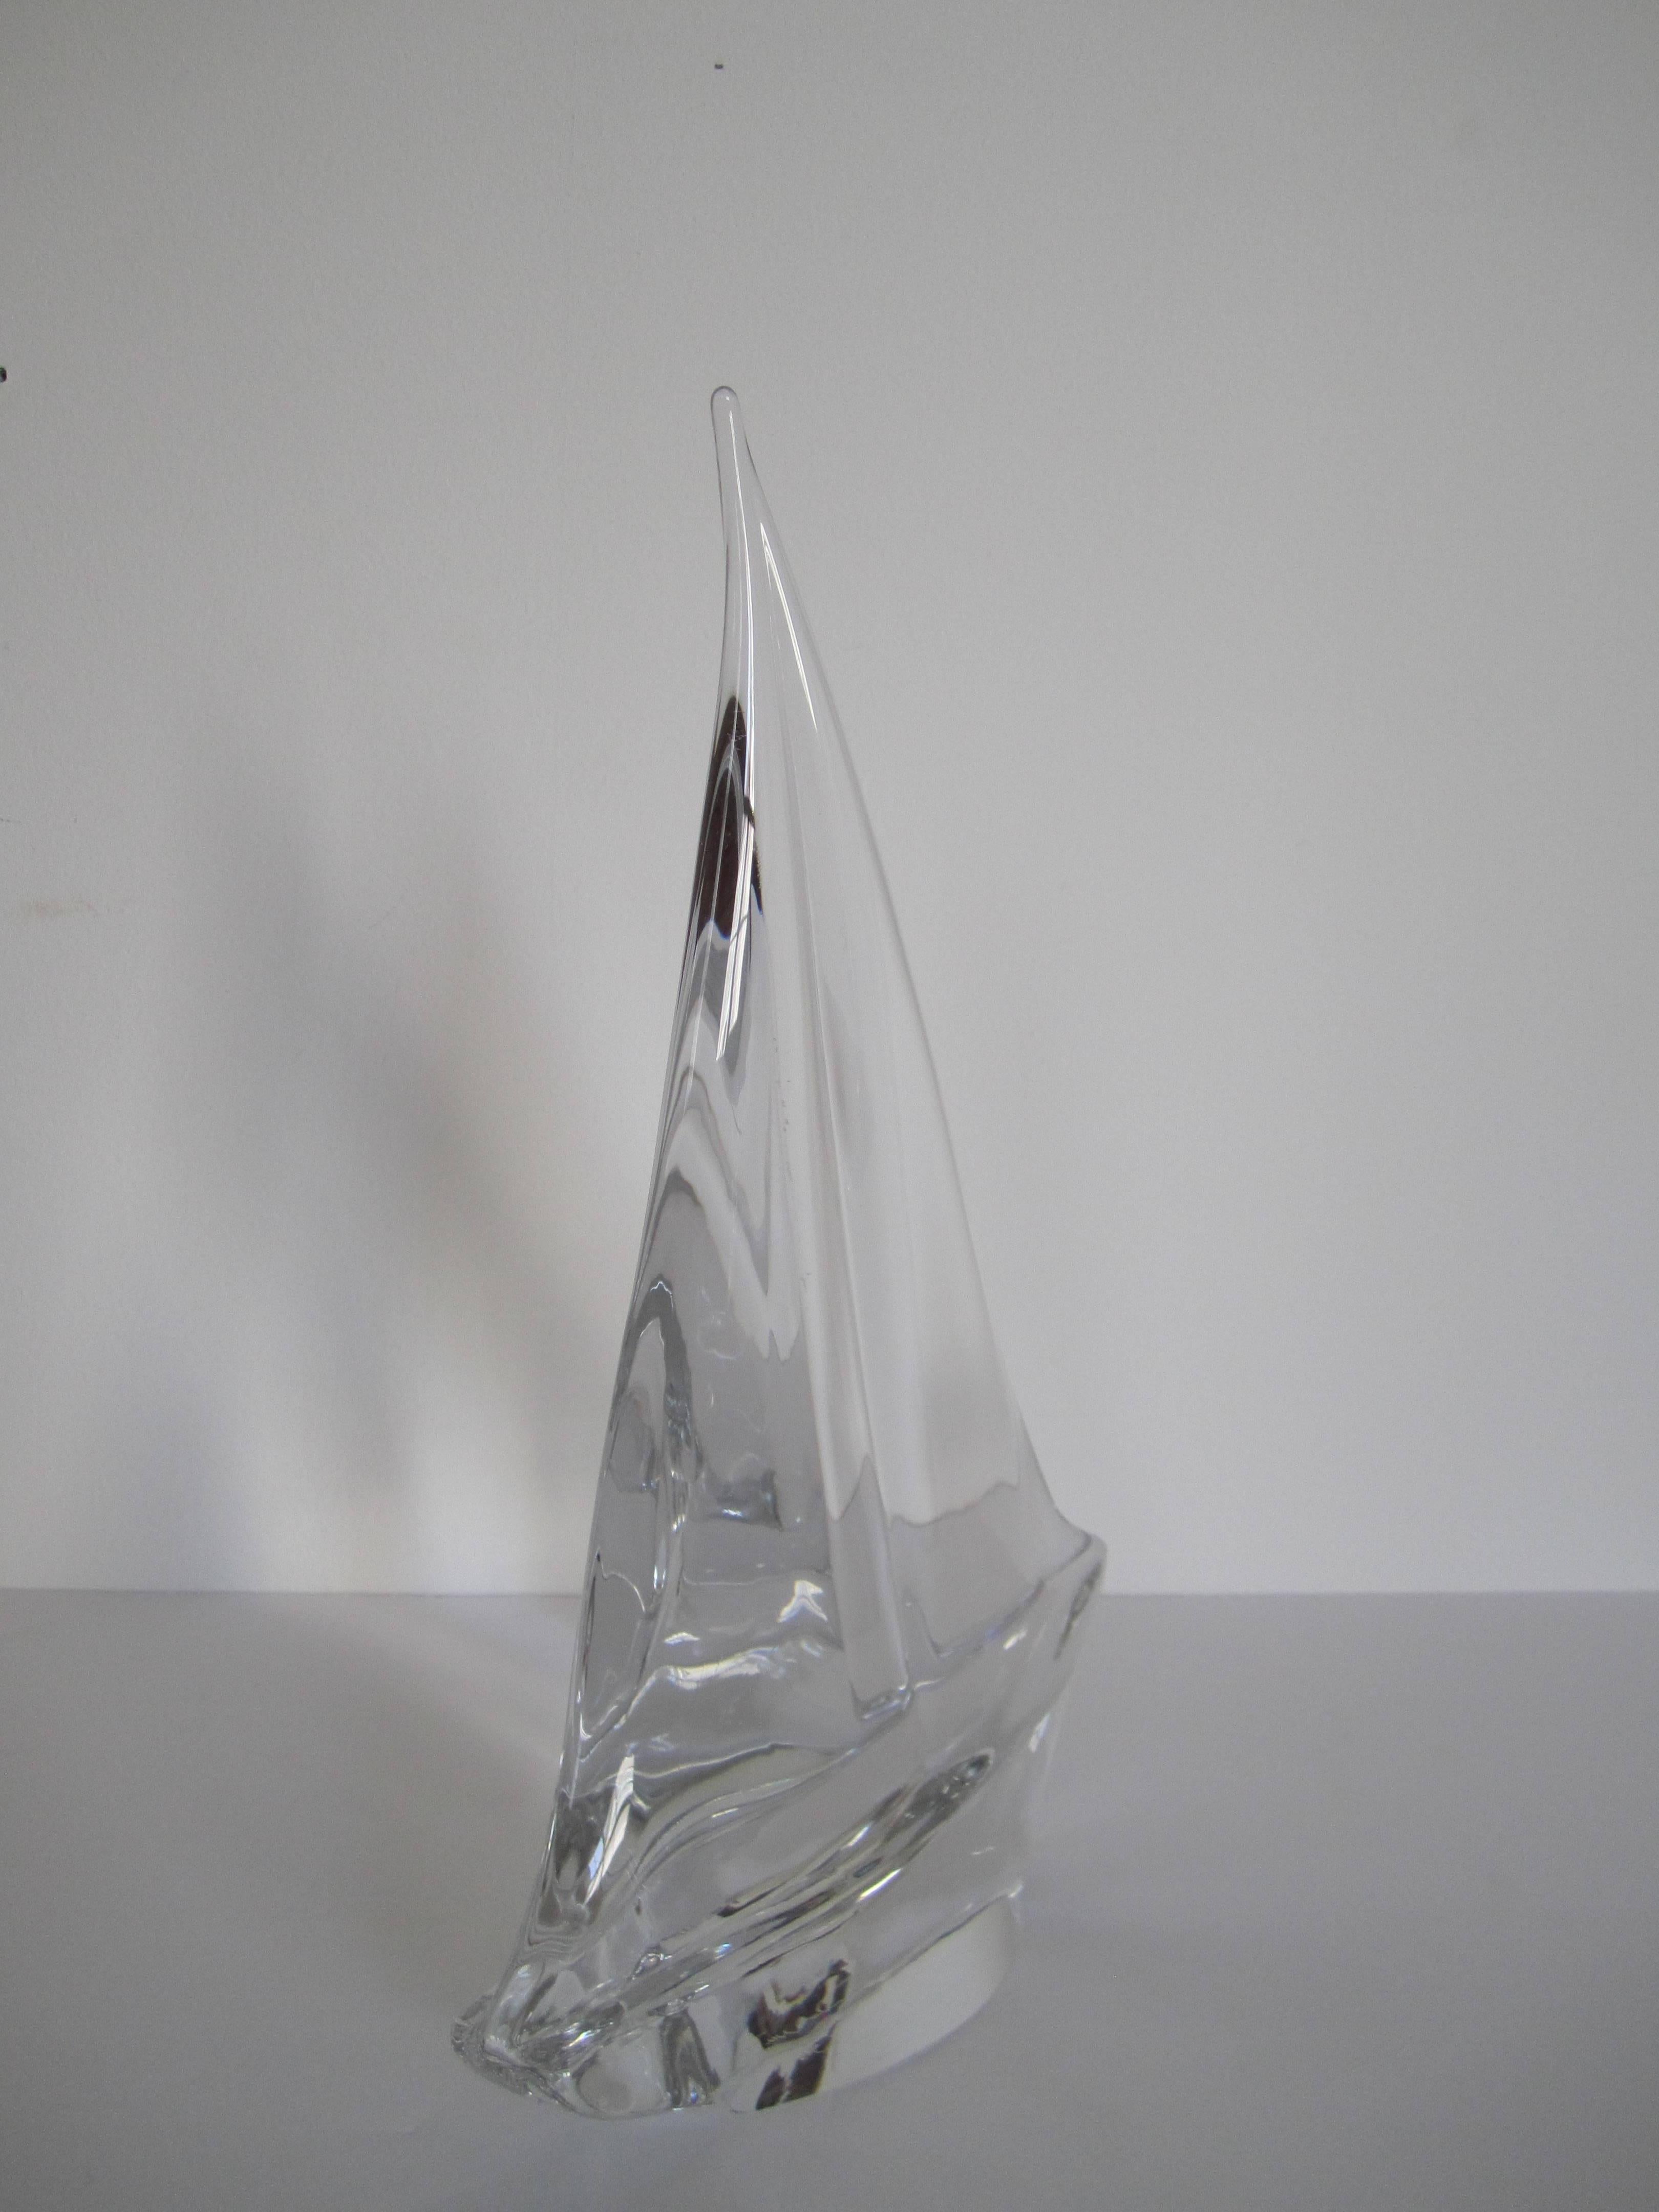 French Substantial Daum Crystal Sailboat Yacht Sculpture